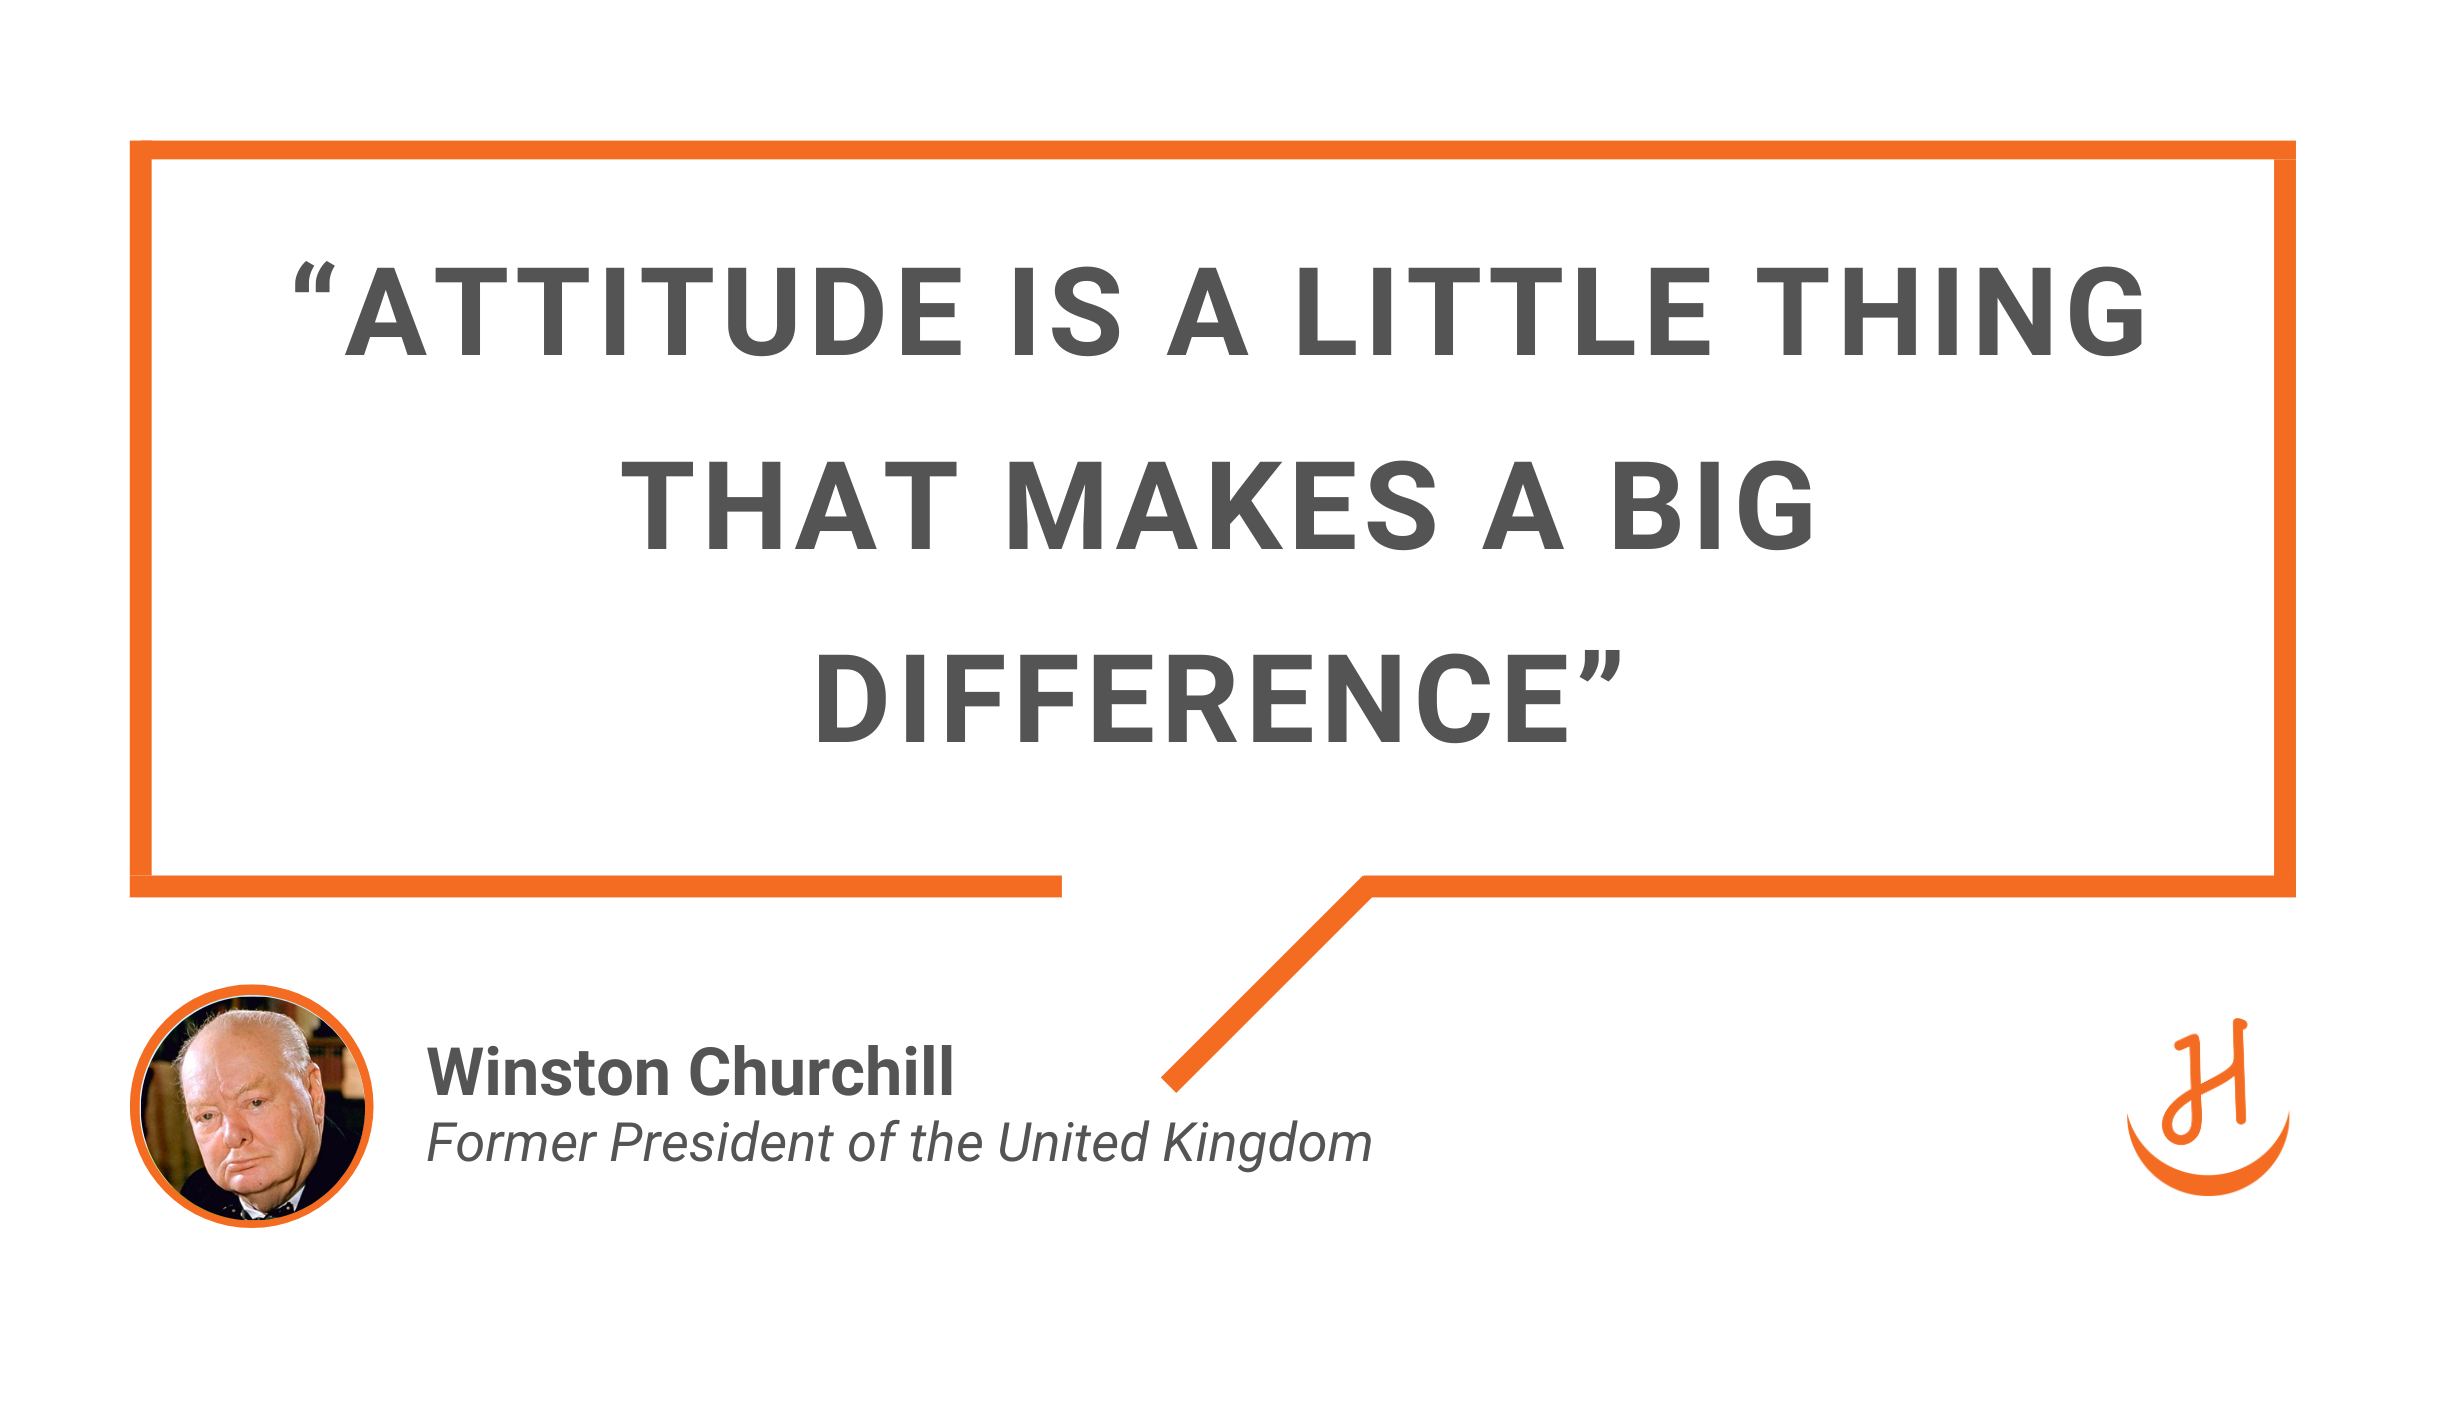 Quote by Winston Churchill, "Attitude is a little thing that makes a big difference"